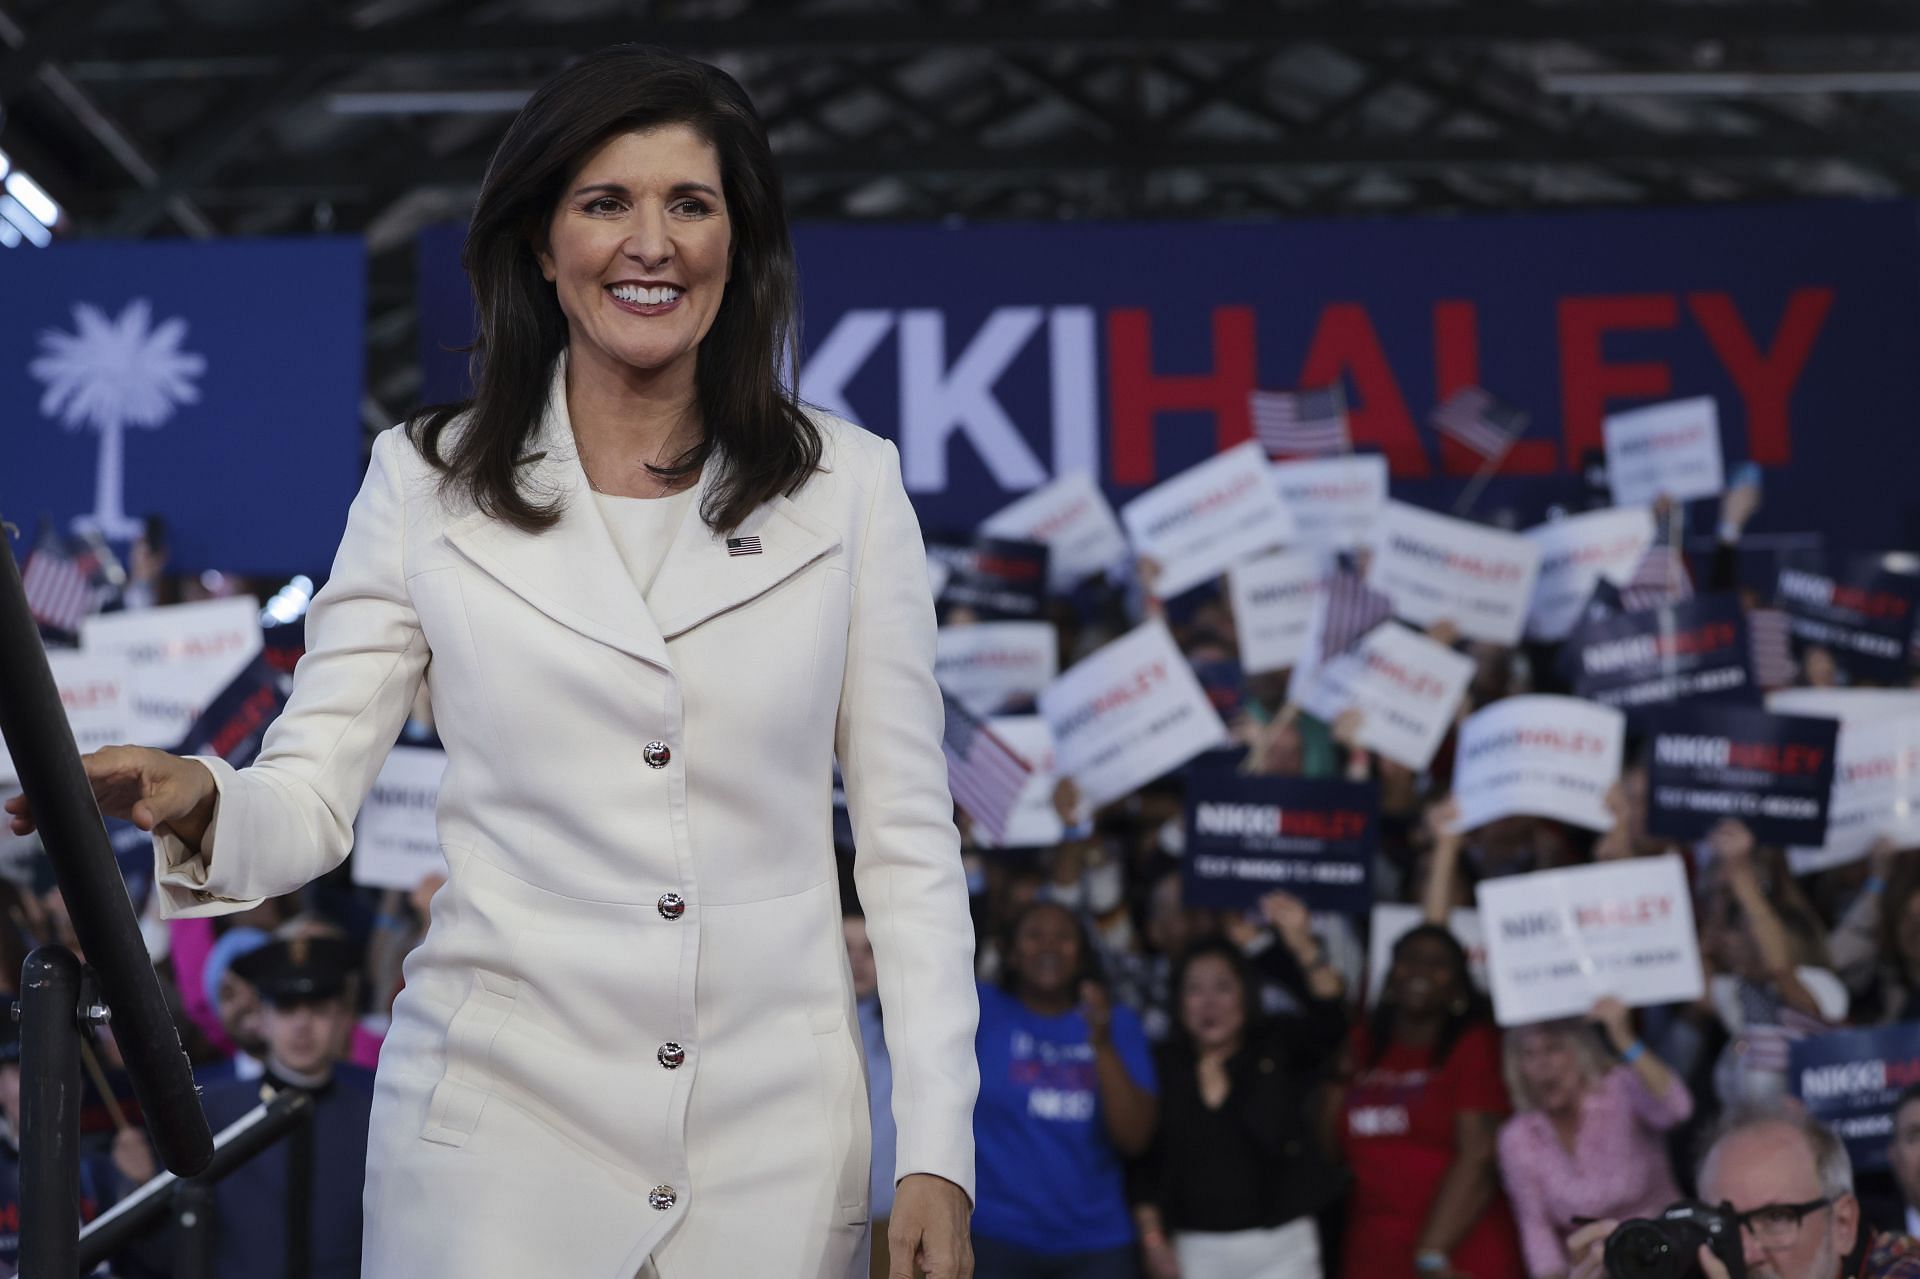 Nikki Haley Dress Drama Explained As Presidential Candidate Sparks Debate After Wearing White To